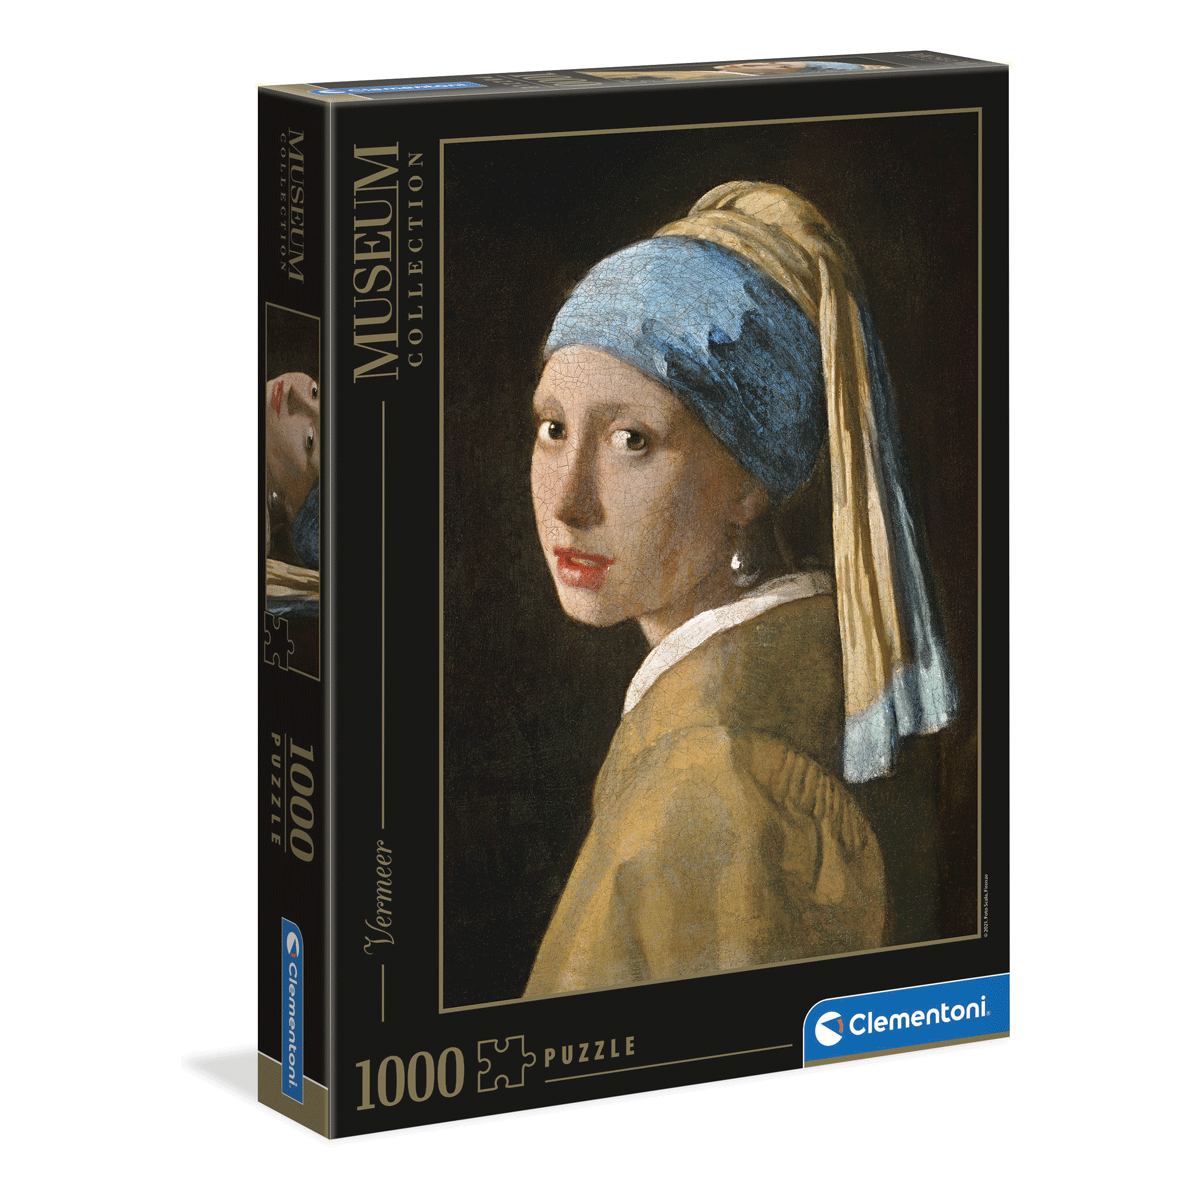 Clementoni puzzle museum collection - vermeer, "girl with pearl earring" - 1000 pezzi, puzzle adulti - CLEMENTONI